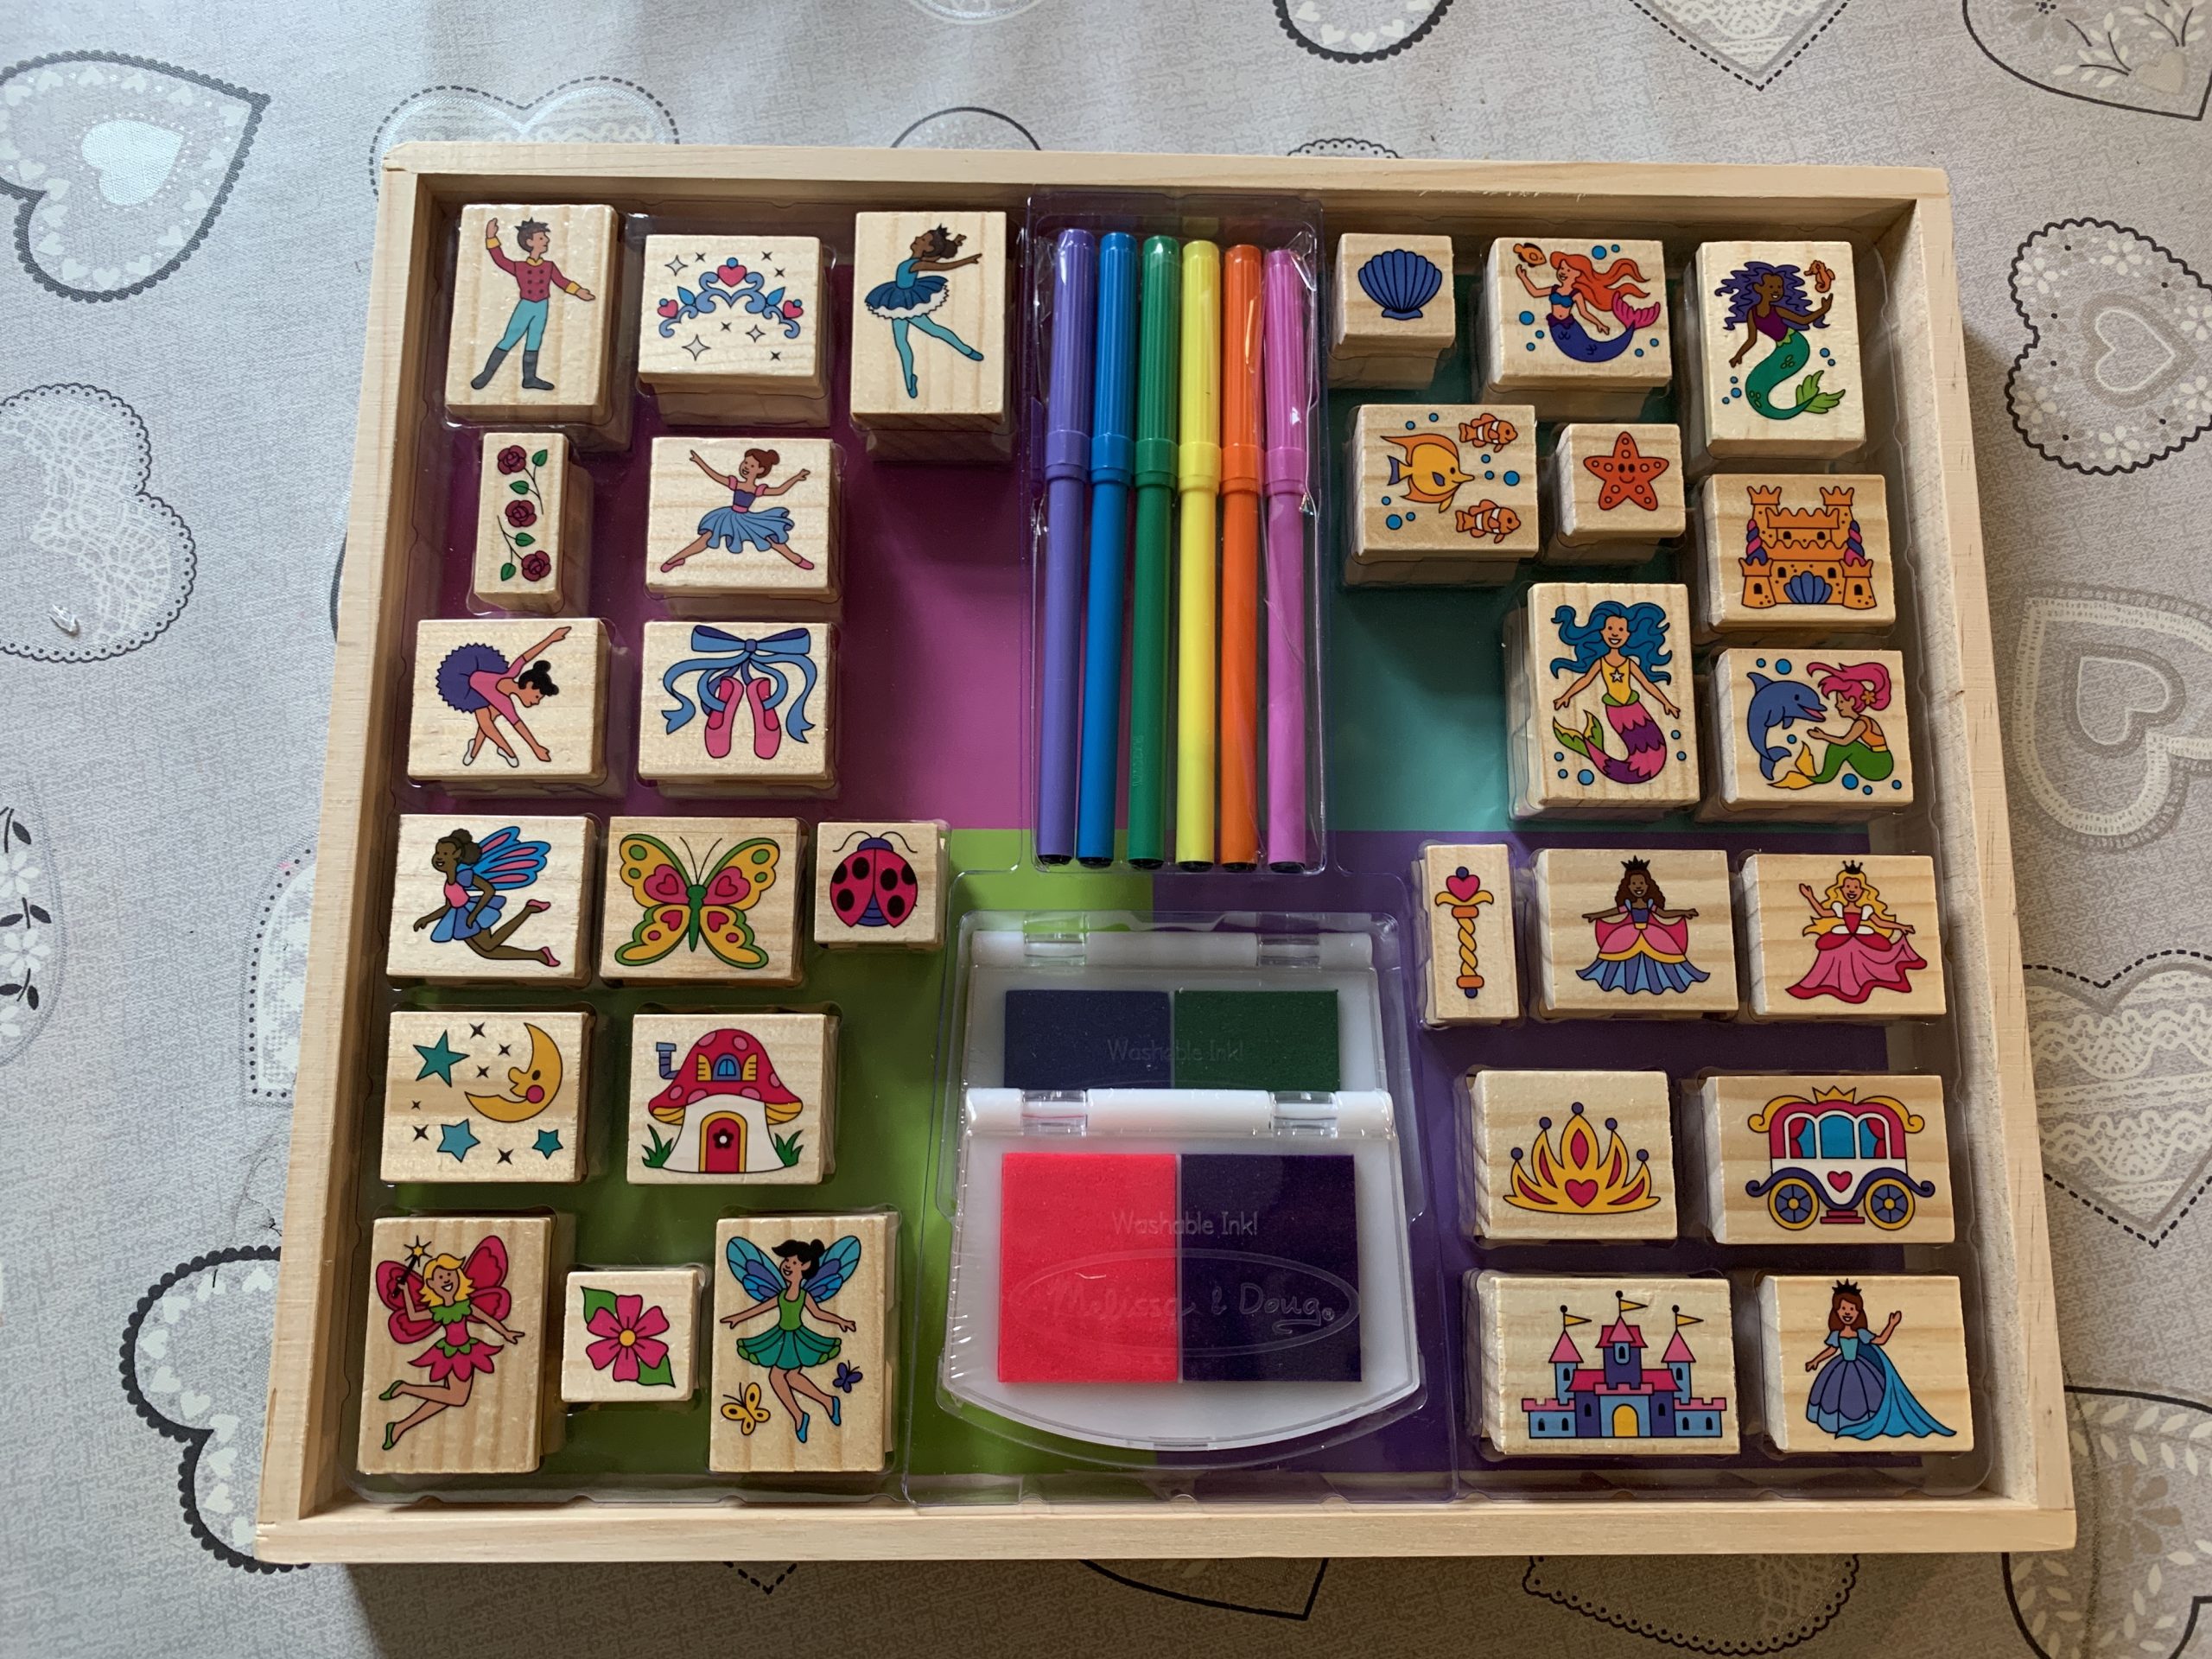 Melissa And Doug Deluxe Stamp Set Fairy Tale Review – What's Good To Do